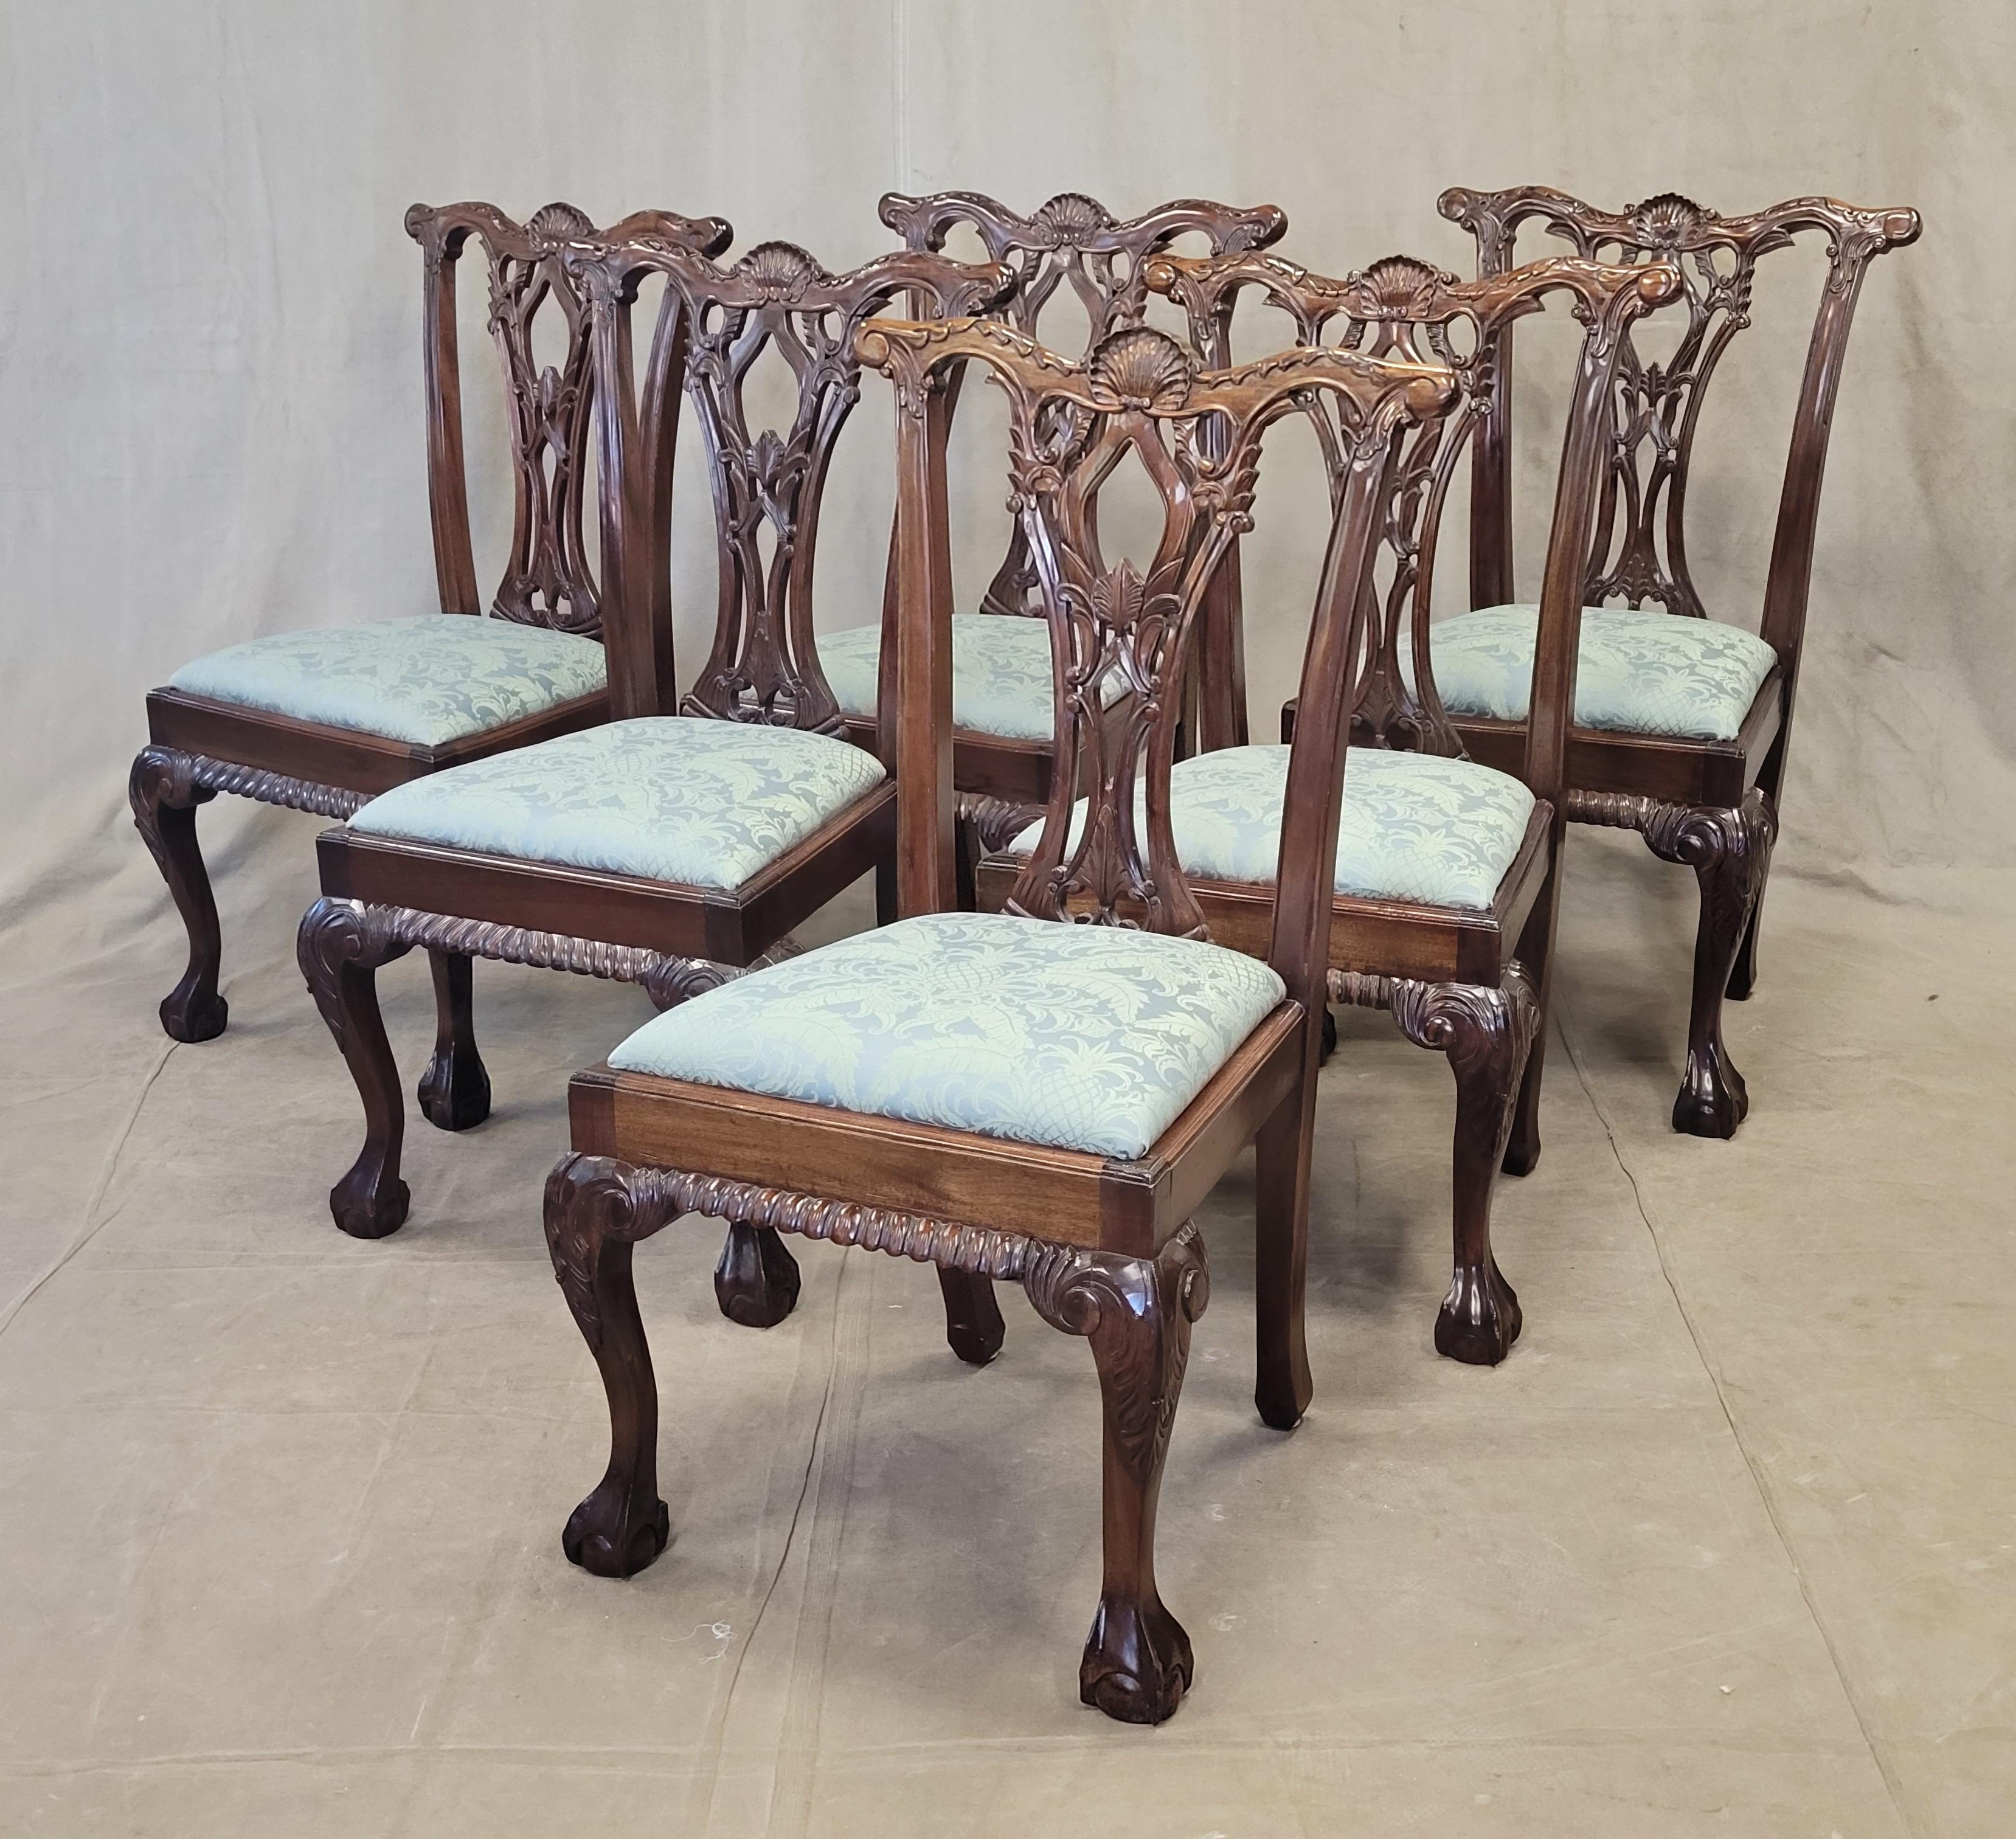 A classic vintage set of six beautifully carved solid mahogany Chippendale style dining chairs. Hand carved details include a shell and leaf motif as well as ball and claw foot. Seats are newly upholstered with a stunning teal (blue/green) silk